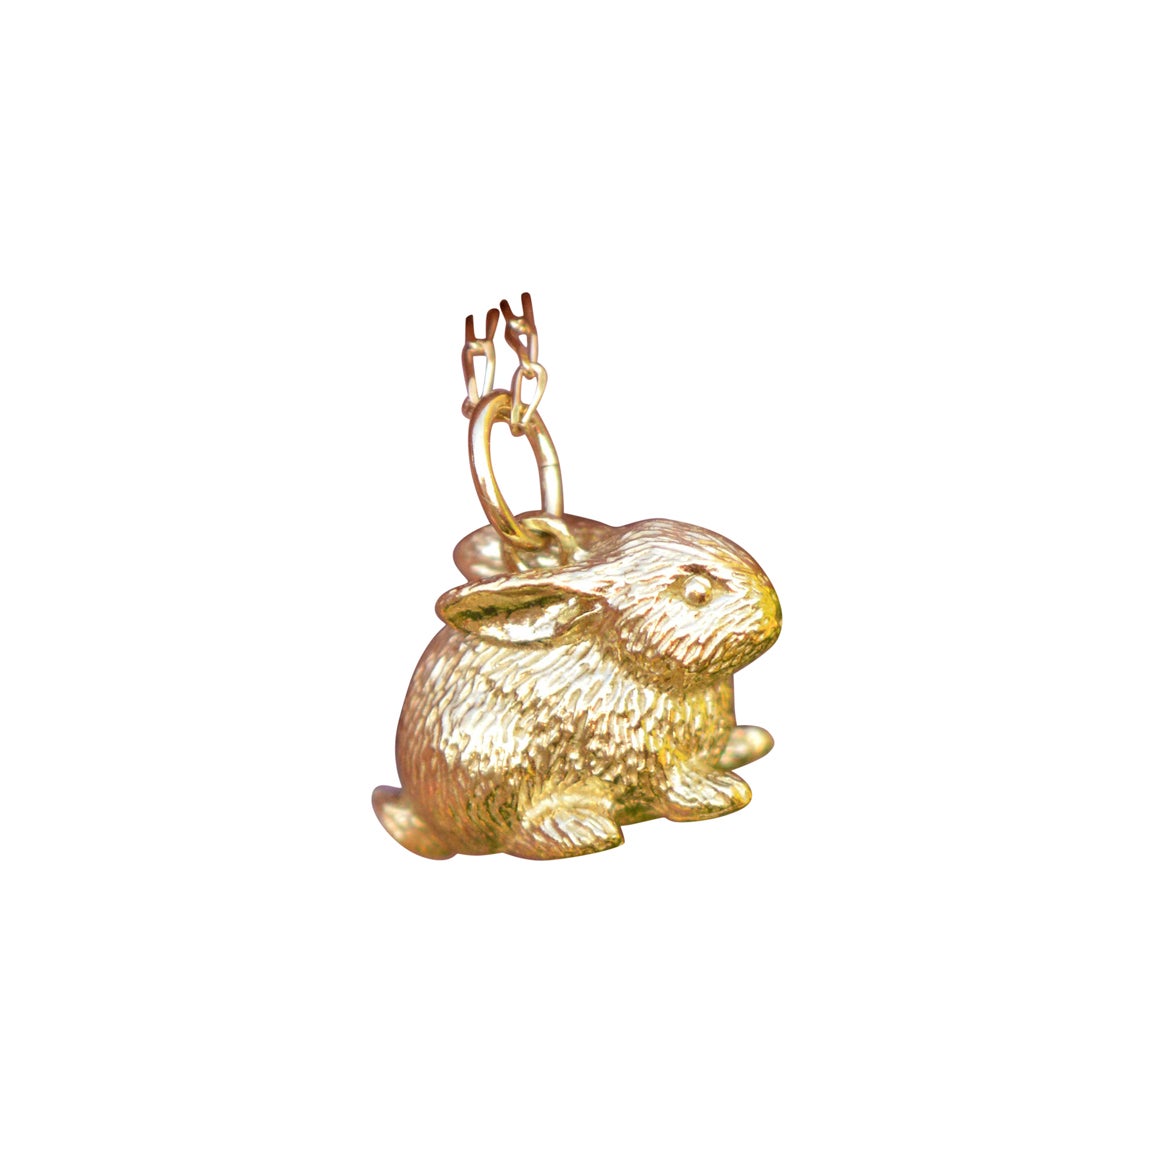 Solid 18 Carat Gold Rabbit Pendant By Lucy Stopes-Roe For Sale